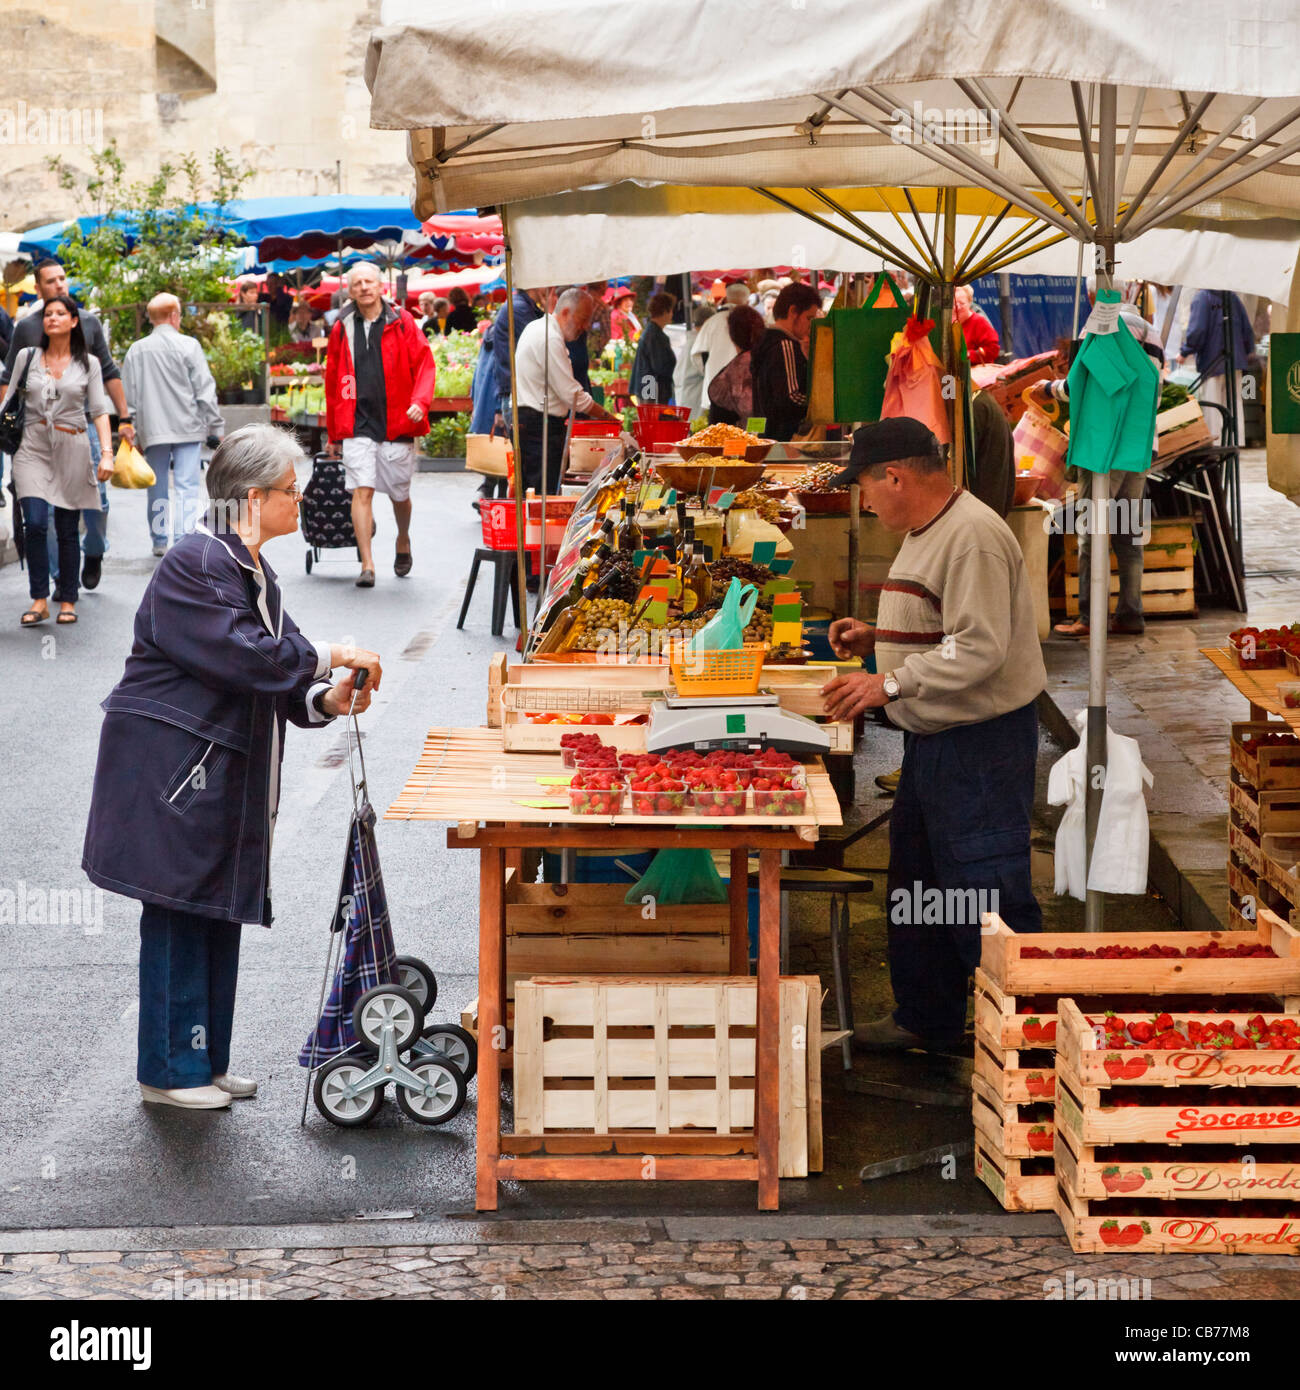 Market stall on the food market in Perigueux, Dordogne, France Stock Photo